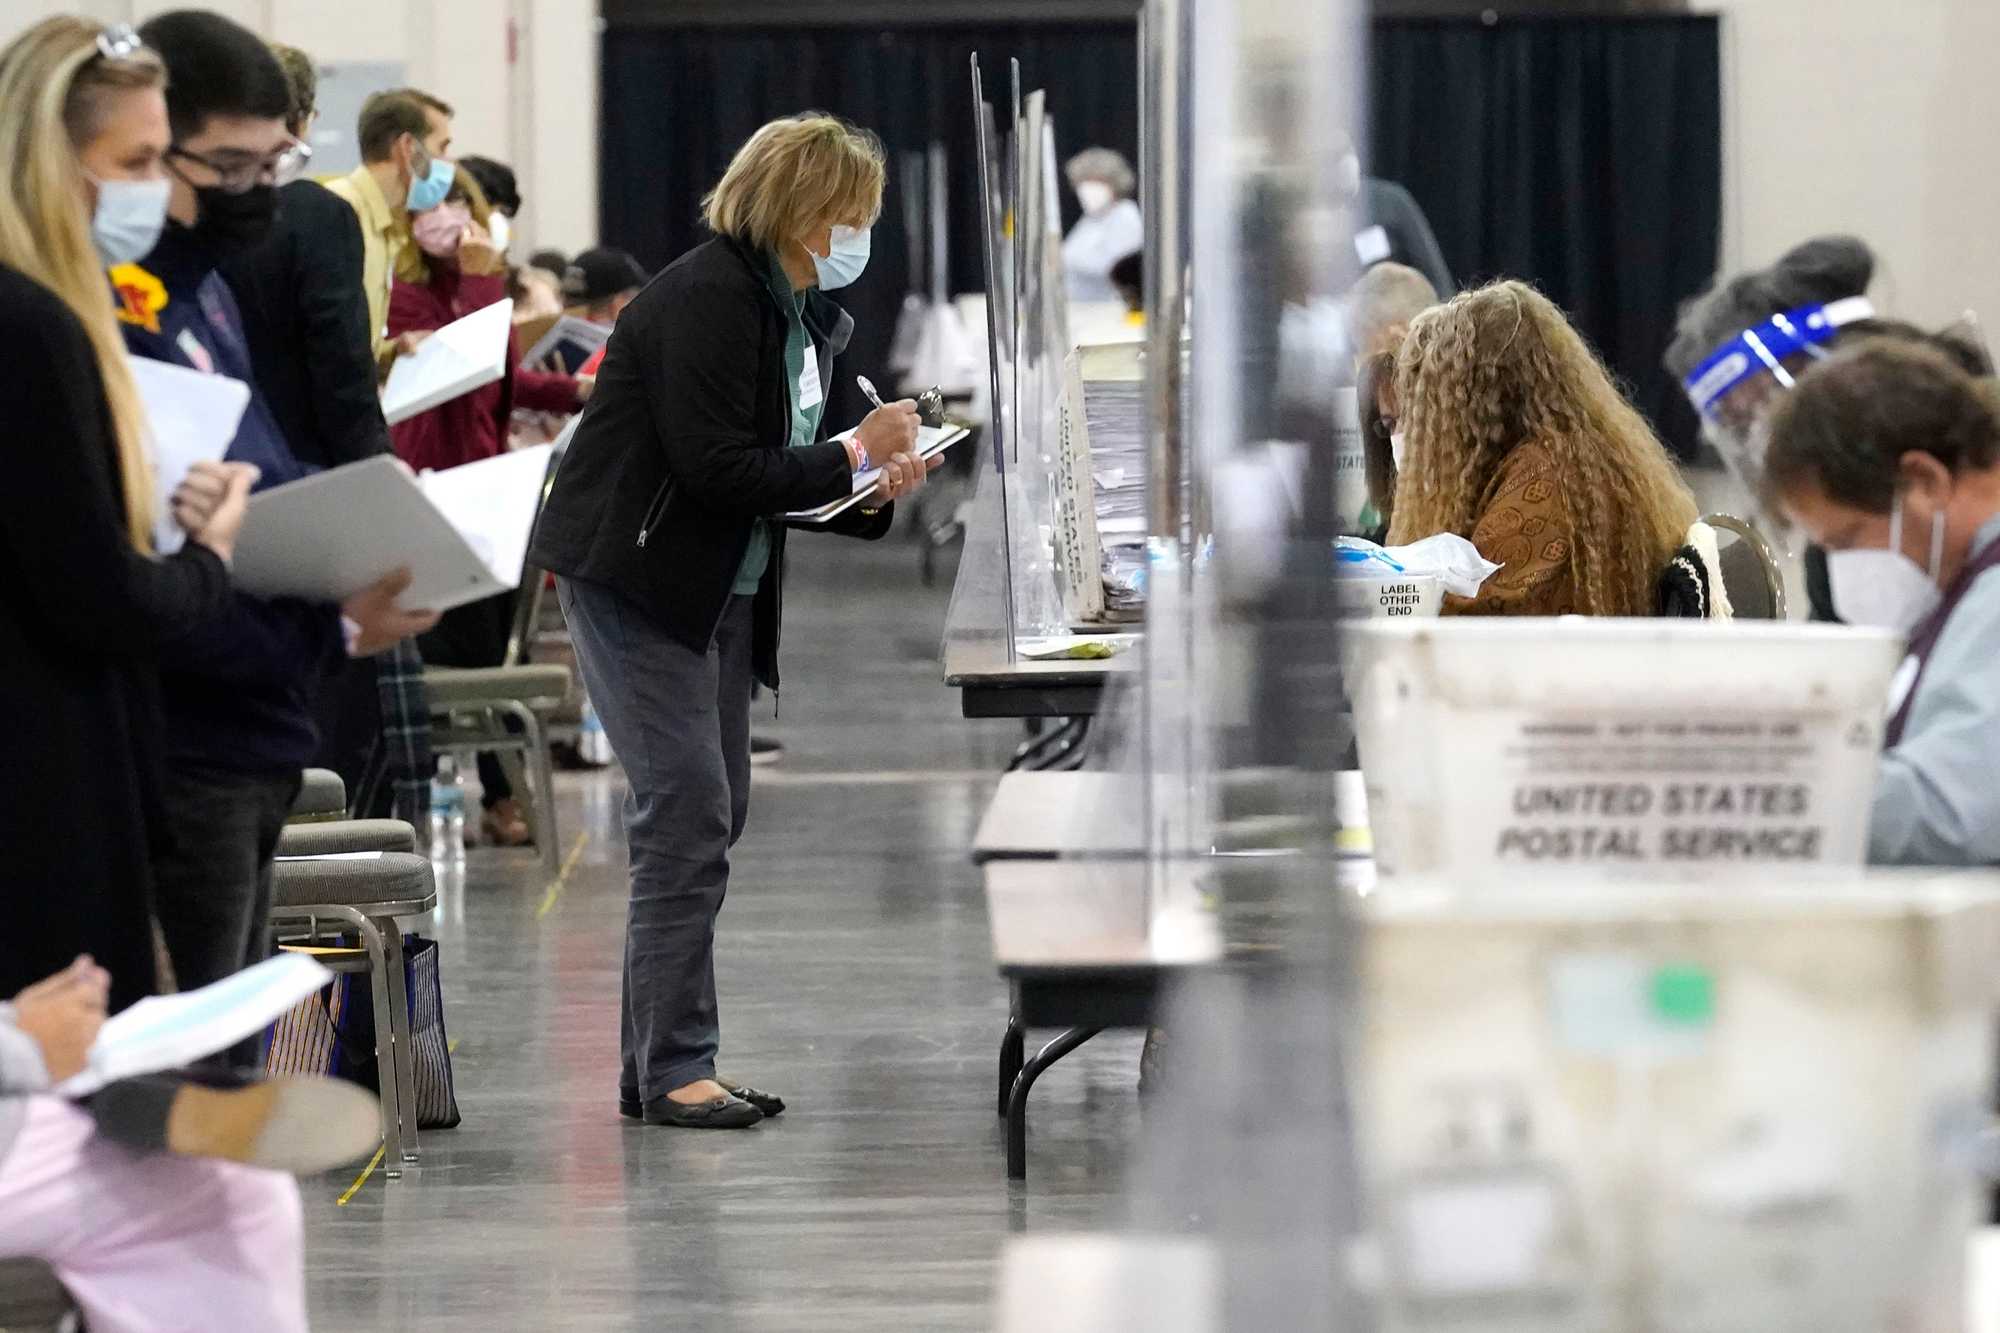 Recount observers watched ballots during a hand recount of presidential votes at the Wisconsin Center, Nov. 20, 2020, in Milwaukee.